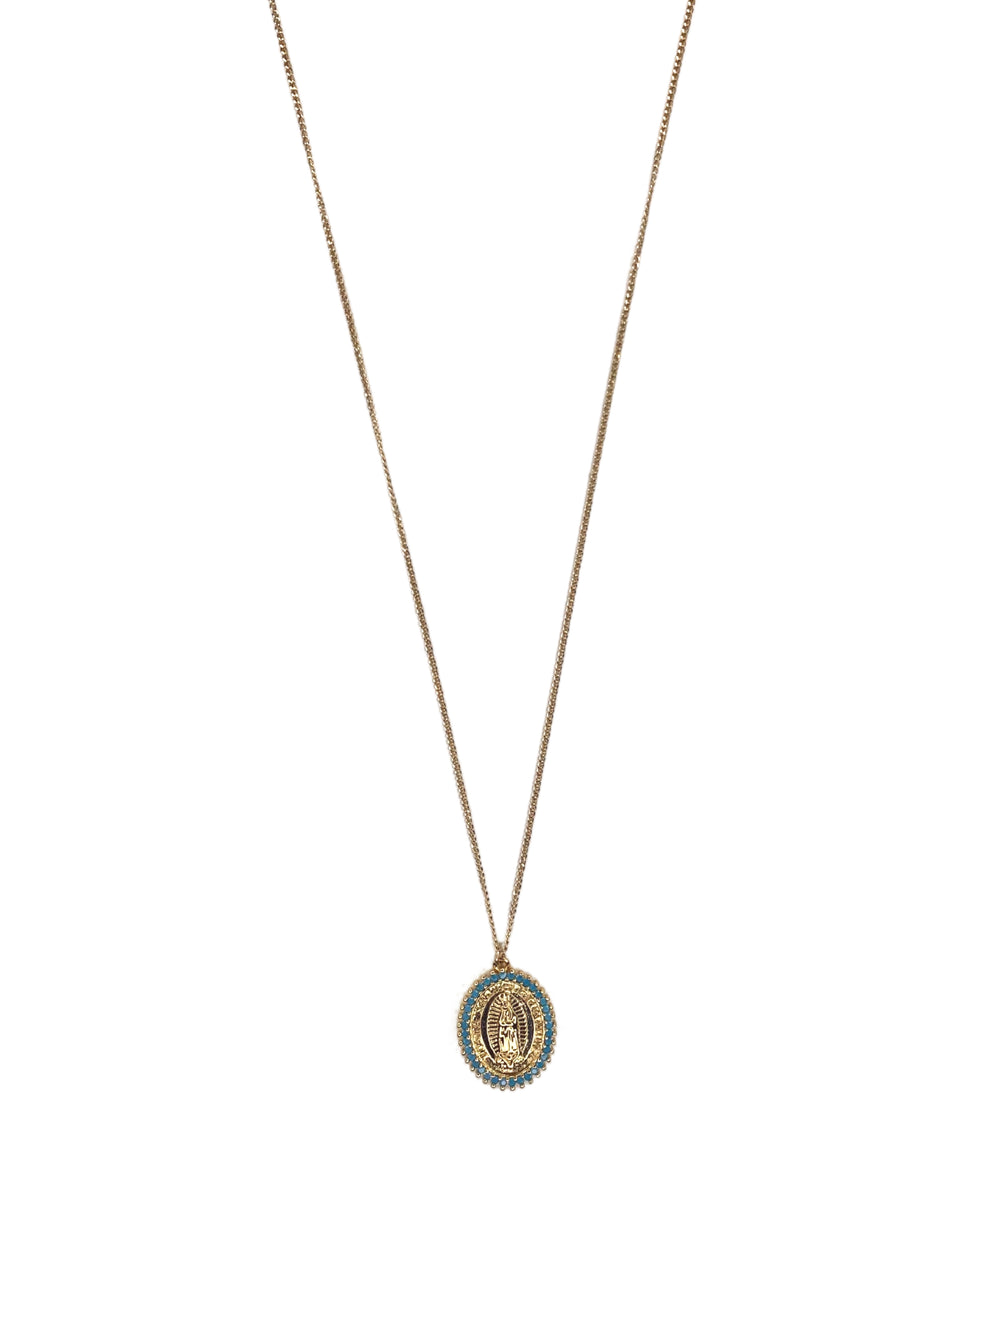 PAVE CRYSTAL "MARY" COIN NECKLACE - Kingfisher Road - Online Boutique